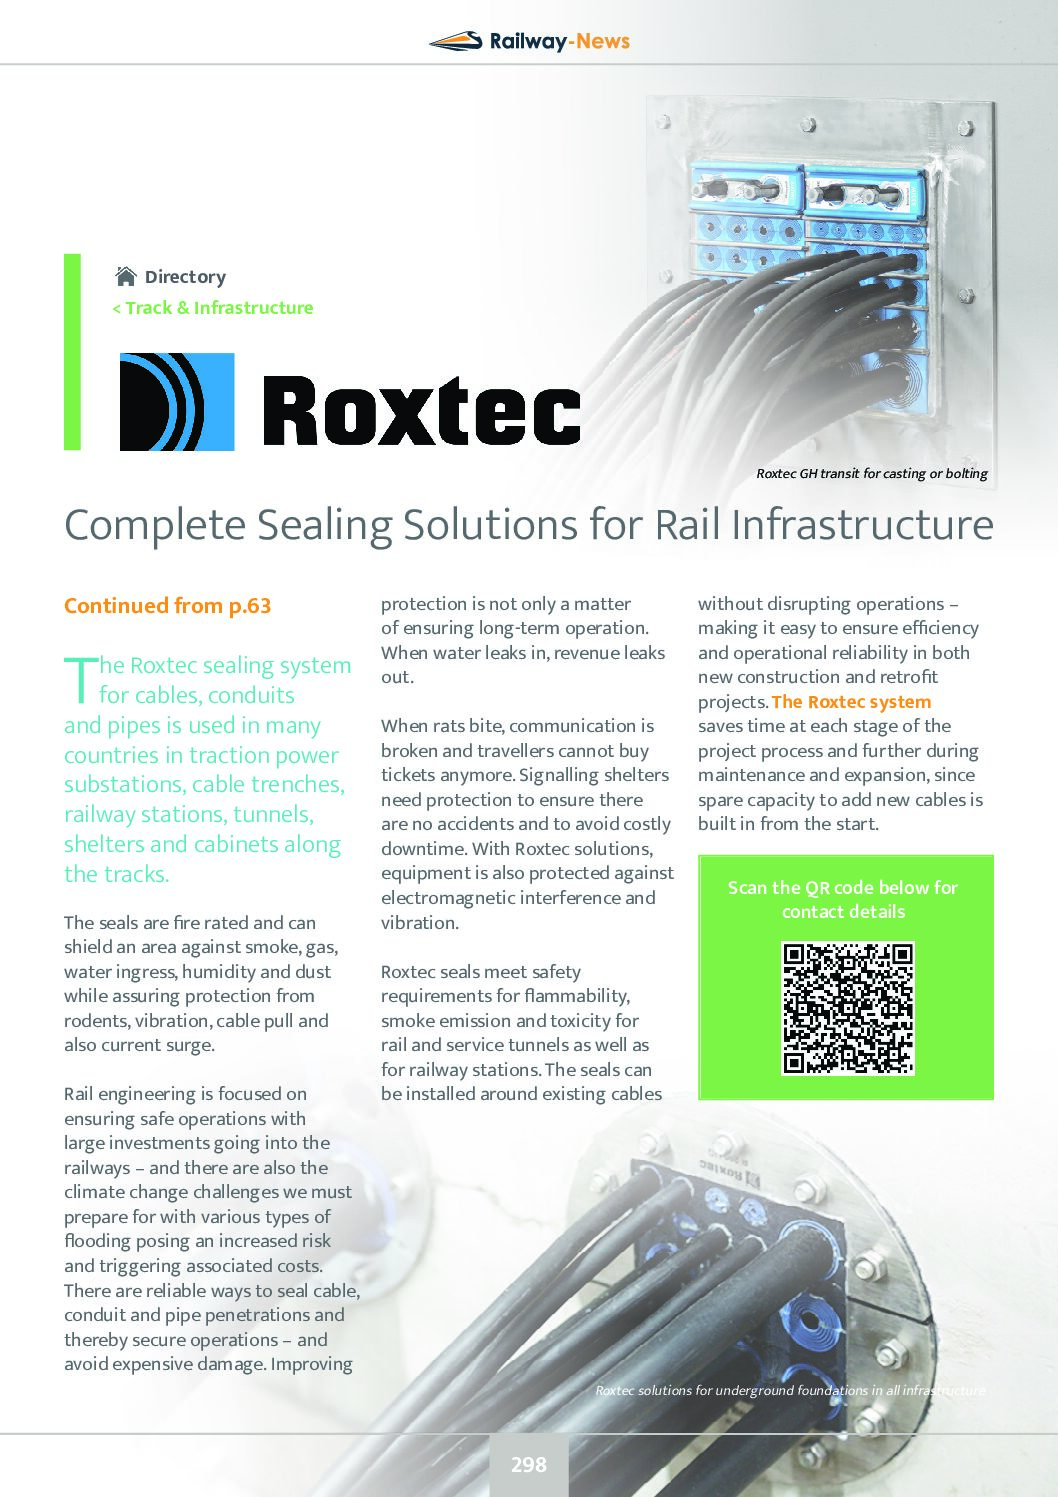 Complete Sealing Solutions for Rail Infrastructure